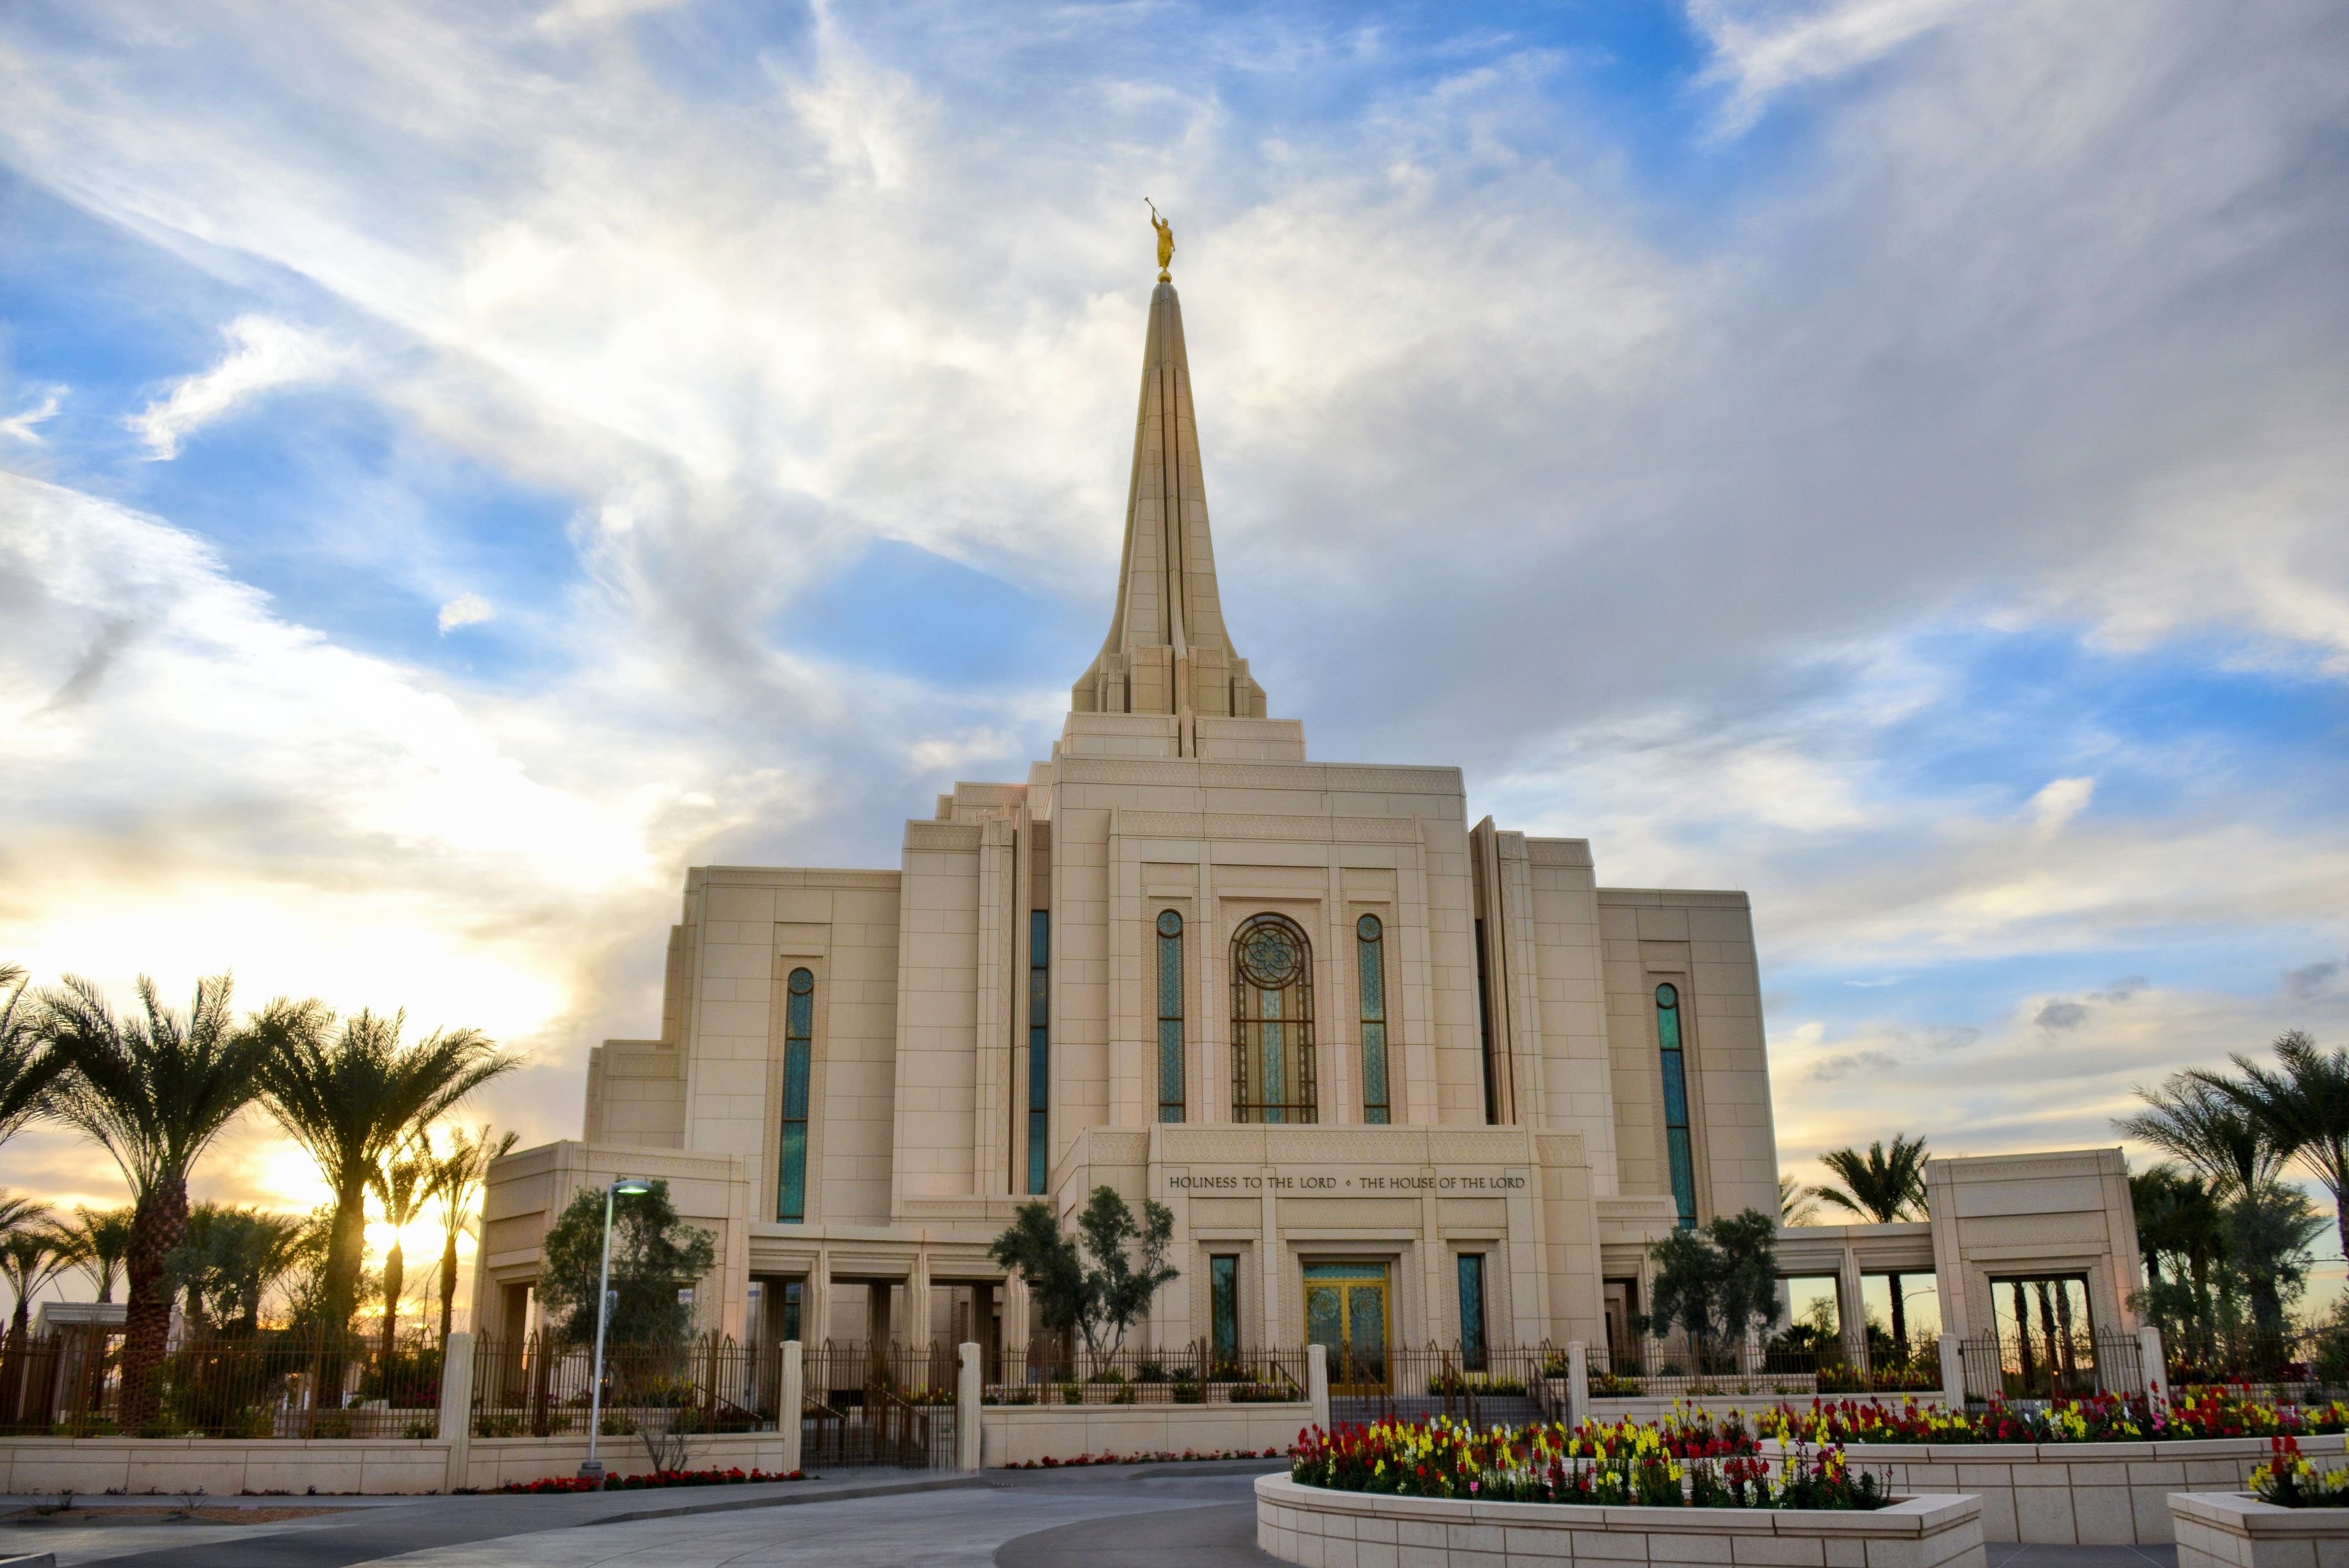 The Gilbert Arizona Temple and grounds in the late afternoon.